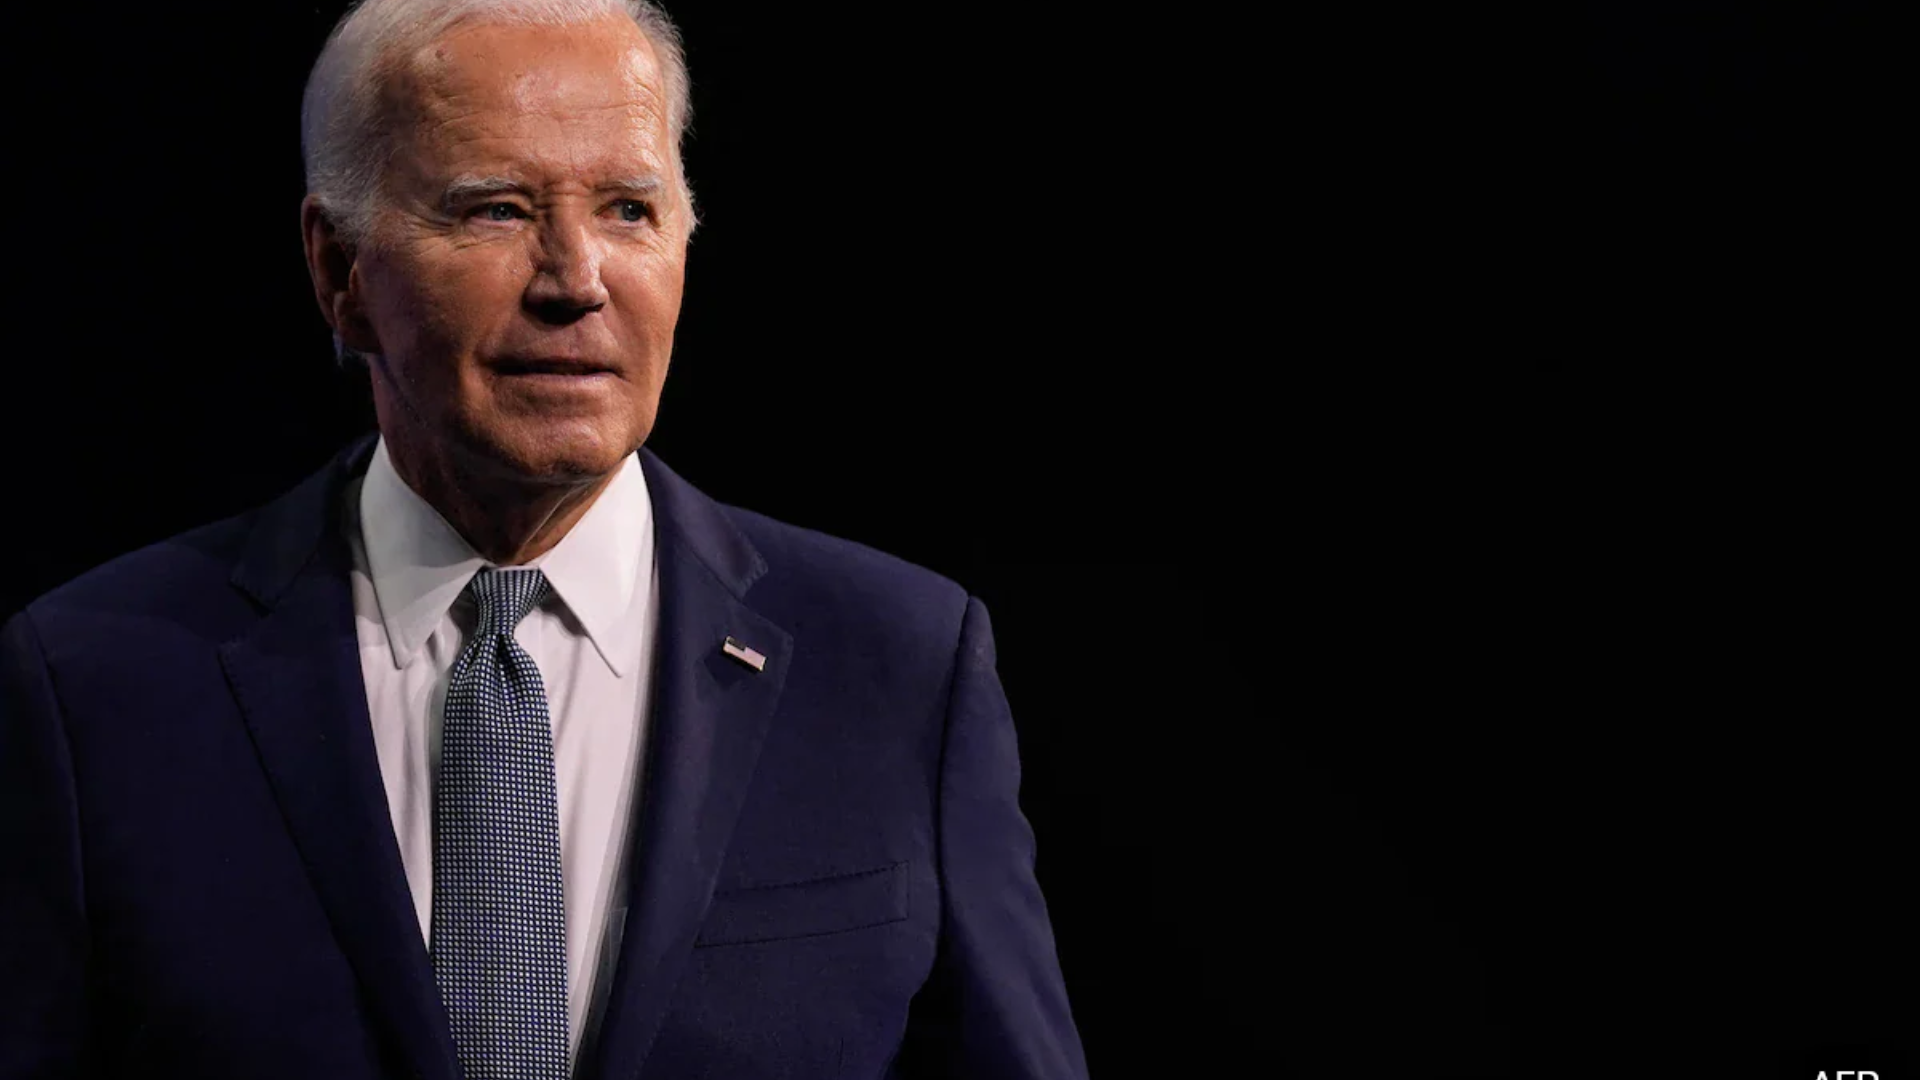 What’s The Best Way To Save US? Joe Biden Answers